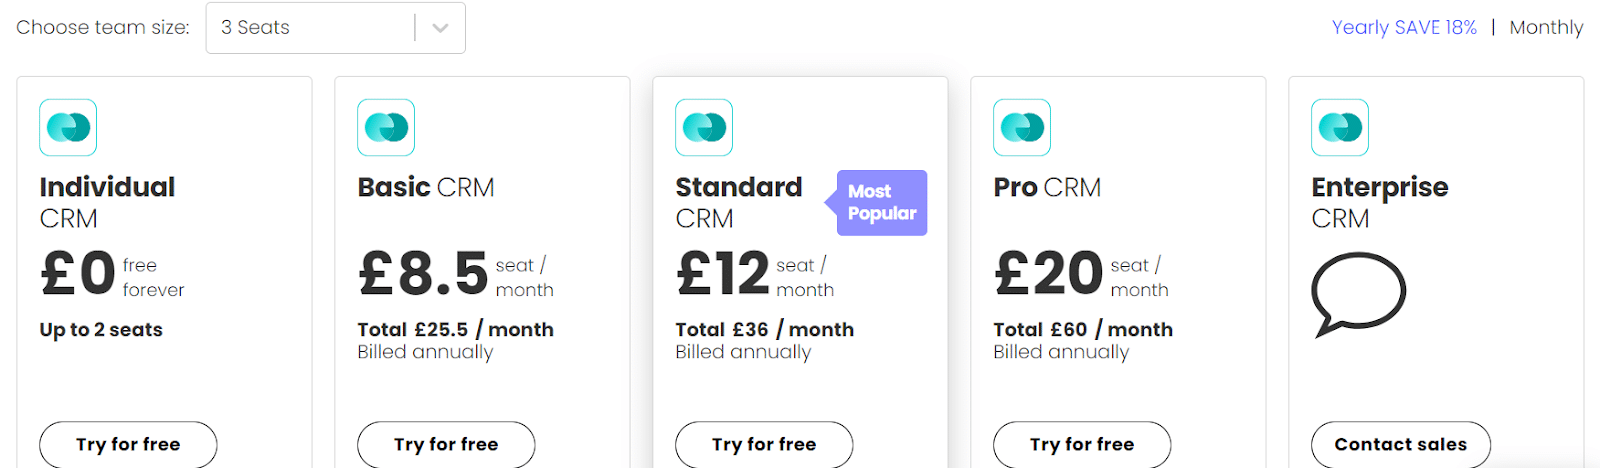 Monday CRM pricing